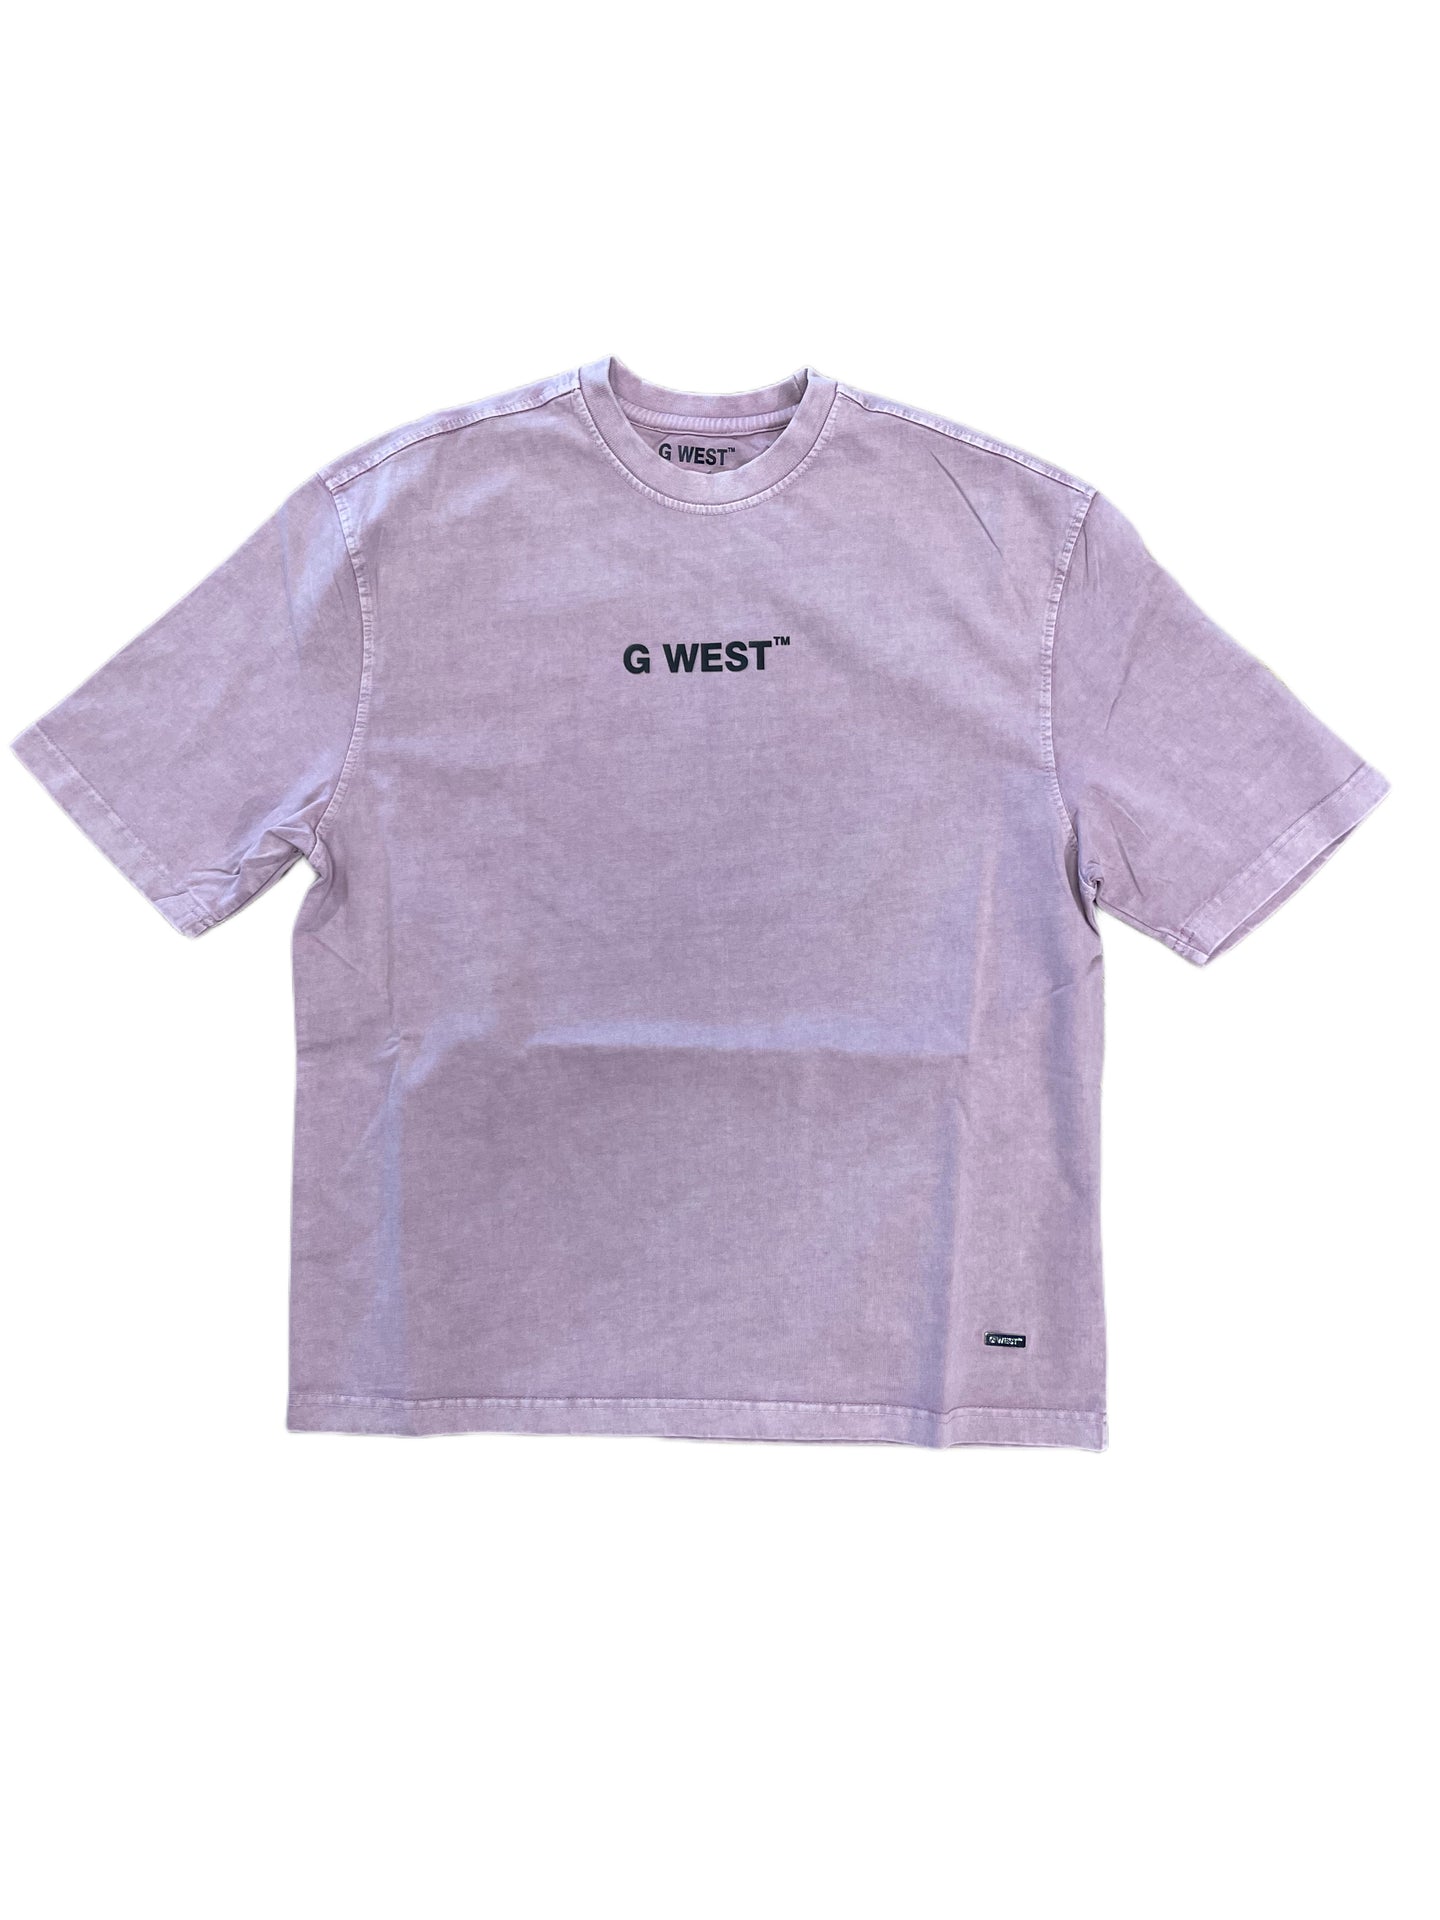 G WEST MENS STONE WASH TEE - PINK